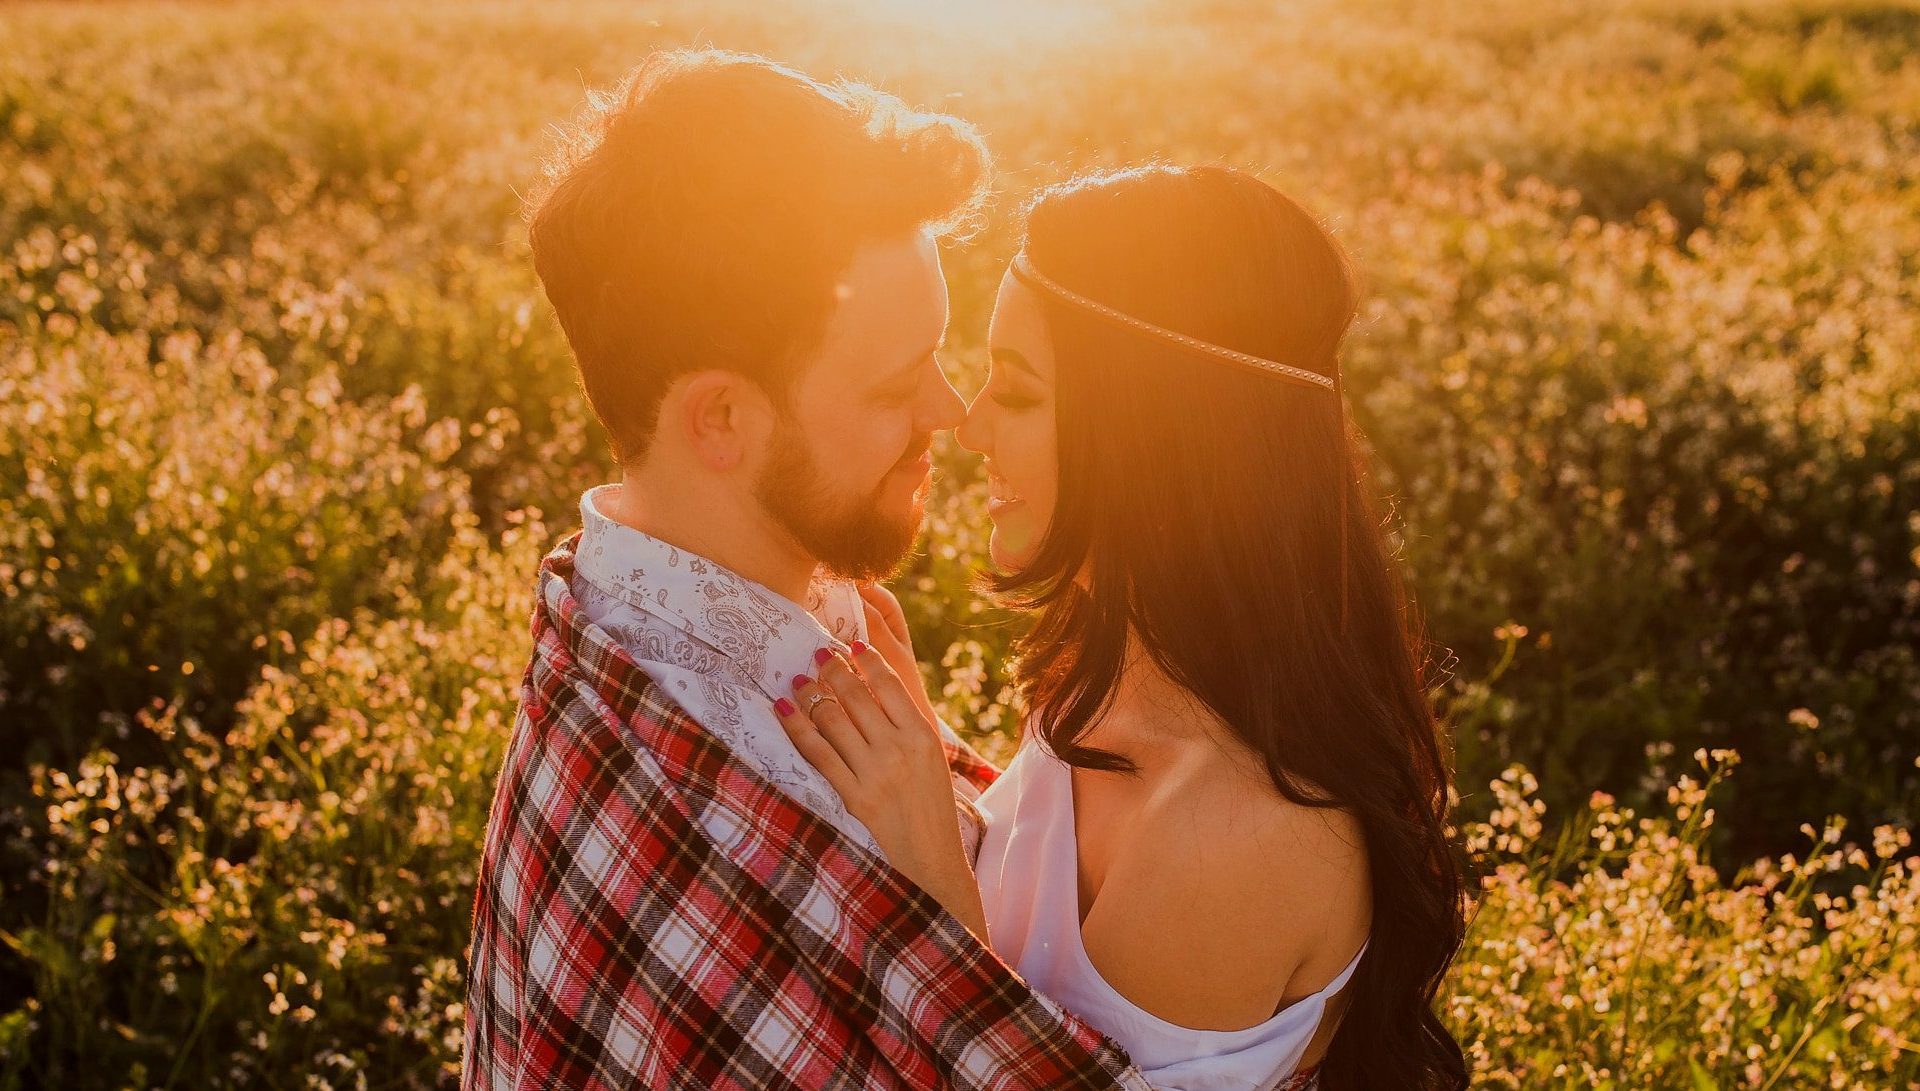 33 People Reveal The Last Straw That Ended A Serious, Committed Relationship